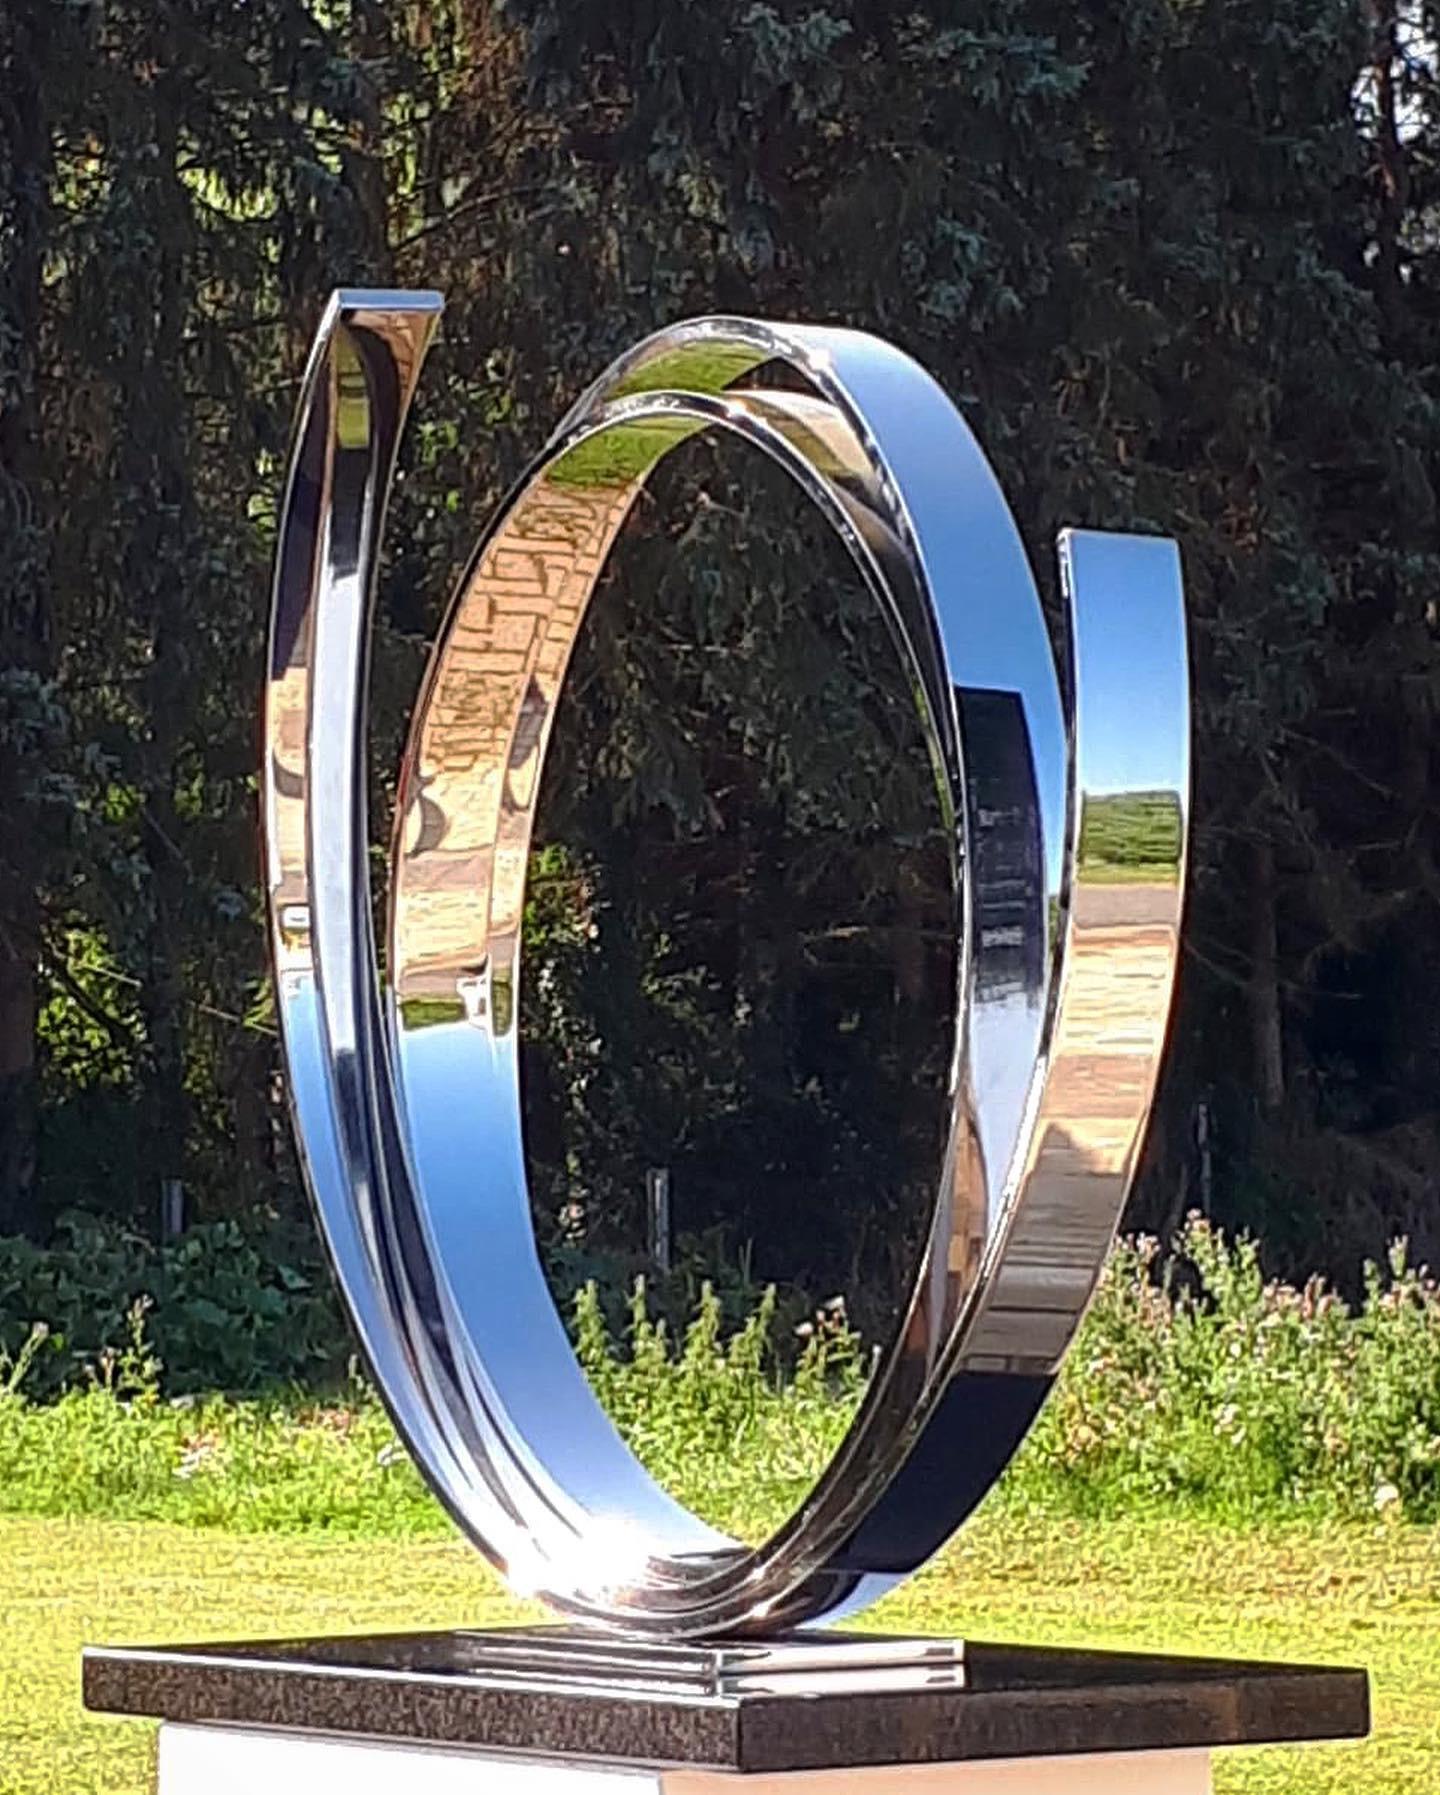 This beautiful large white sculpture can be used for indoor or outdoors. It is a stunning polished stainless steel and makes for an elegant statement in any garden, lobby or private home.

Artist: Kuno Vollet
Silver sculpture that reflects the light